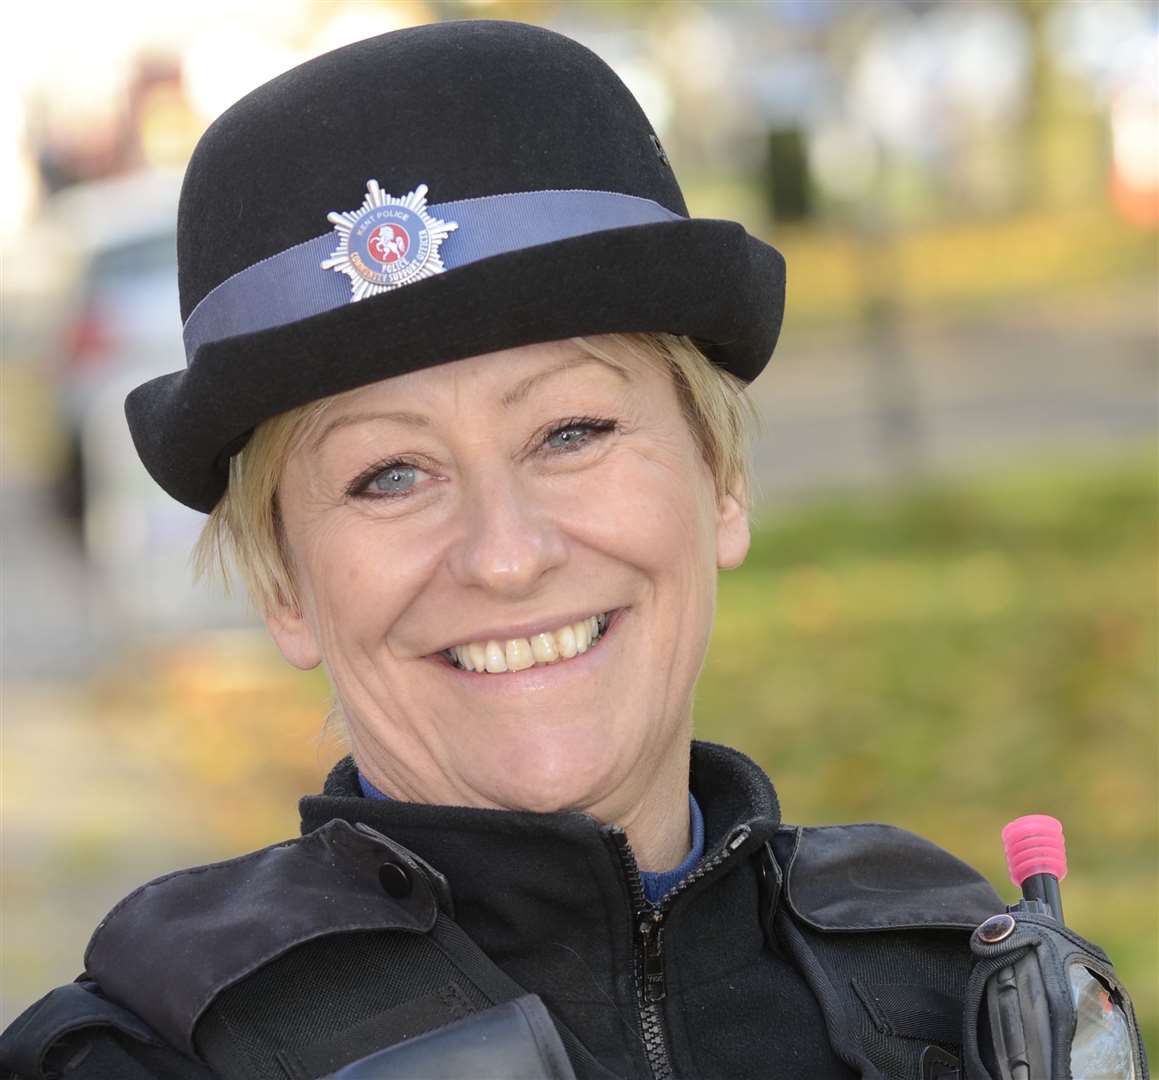 PCSO Julia James was found dead on a remote track Picture: Gary Browne